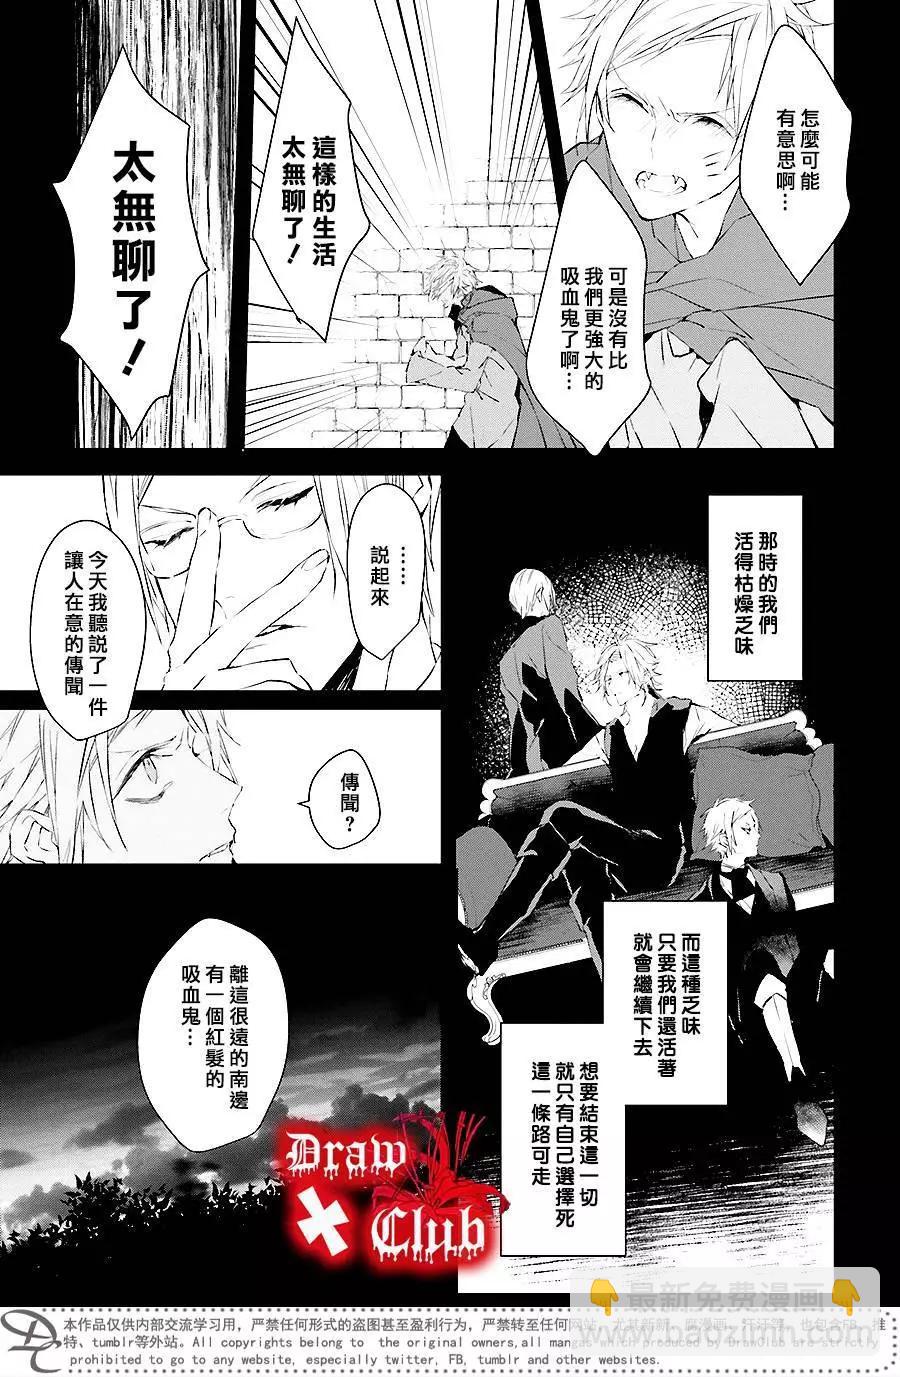 Bloody Mary - 第35回 - 1